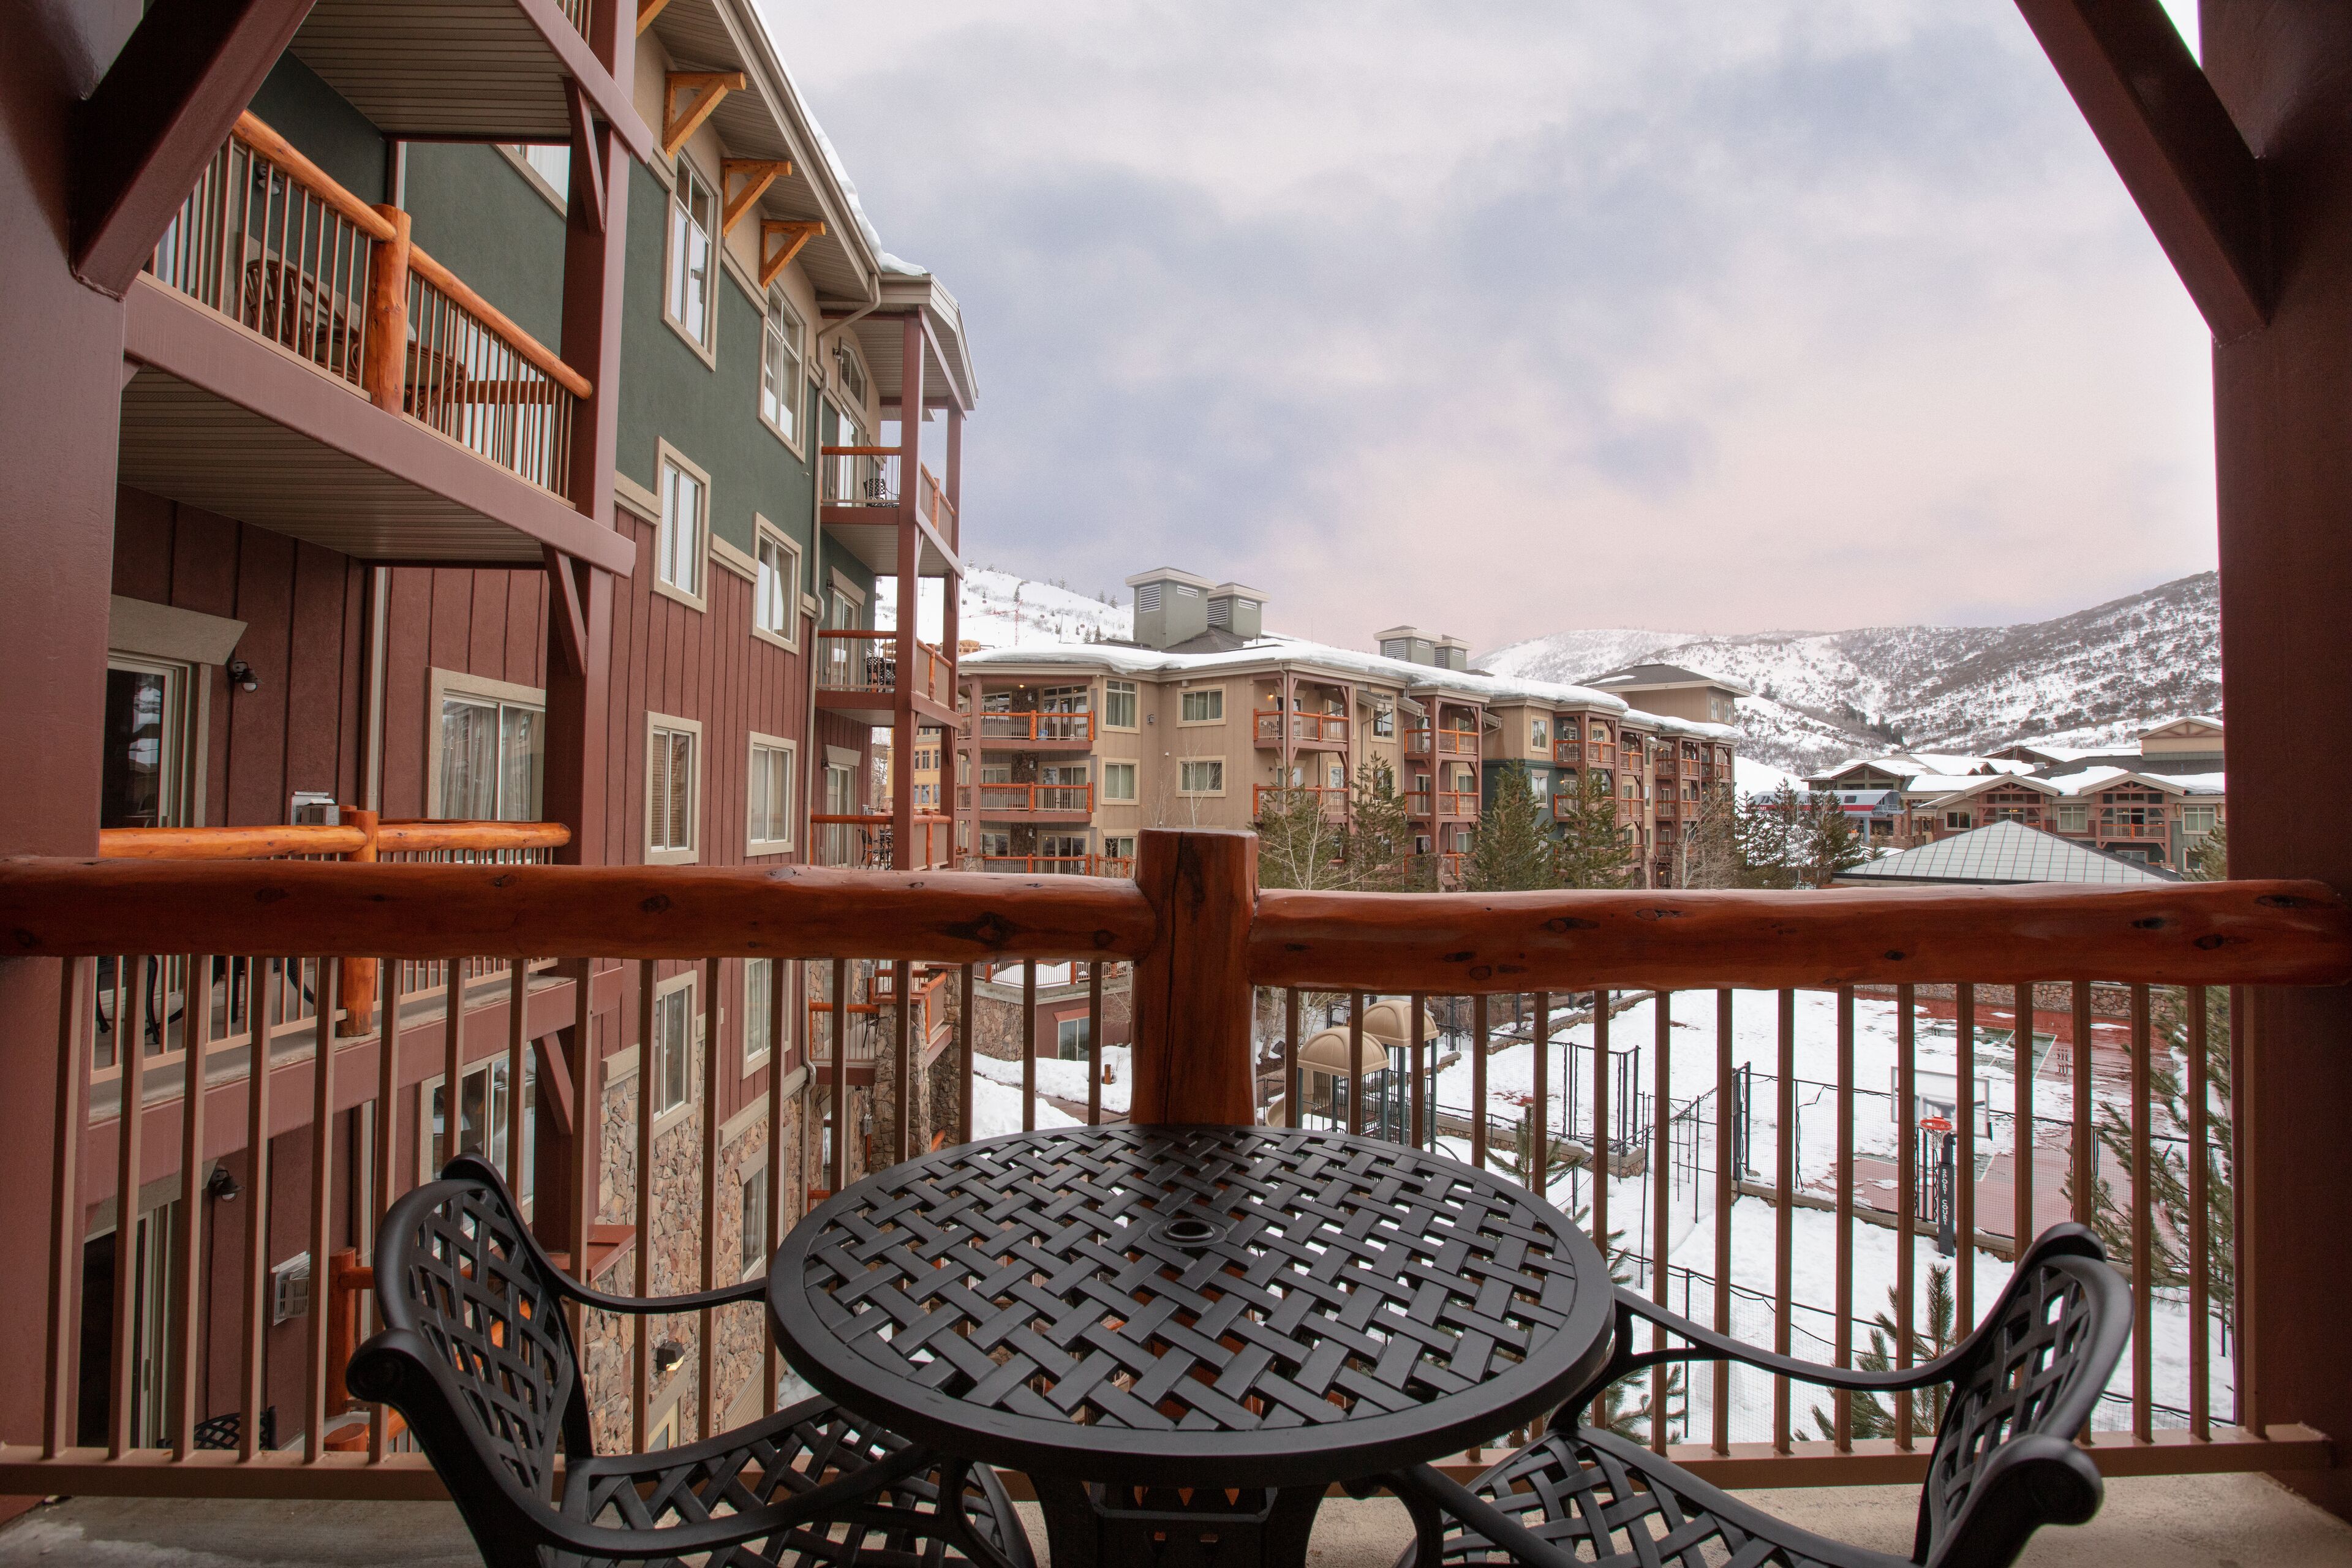 Westgate Park City Resort and Spa